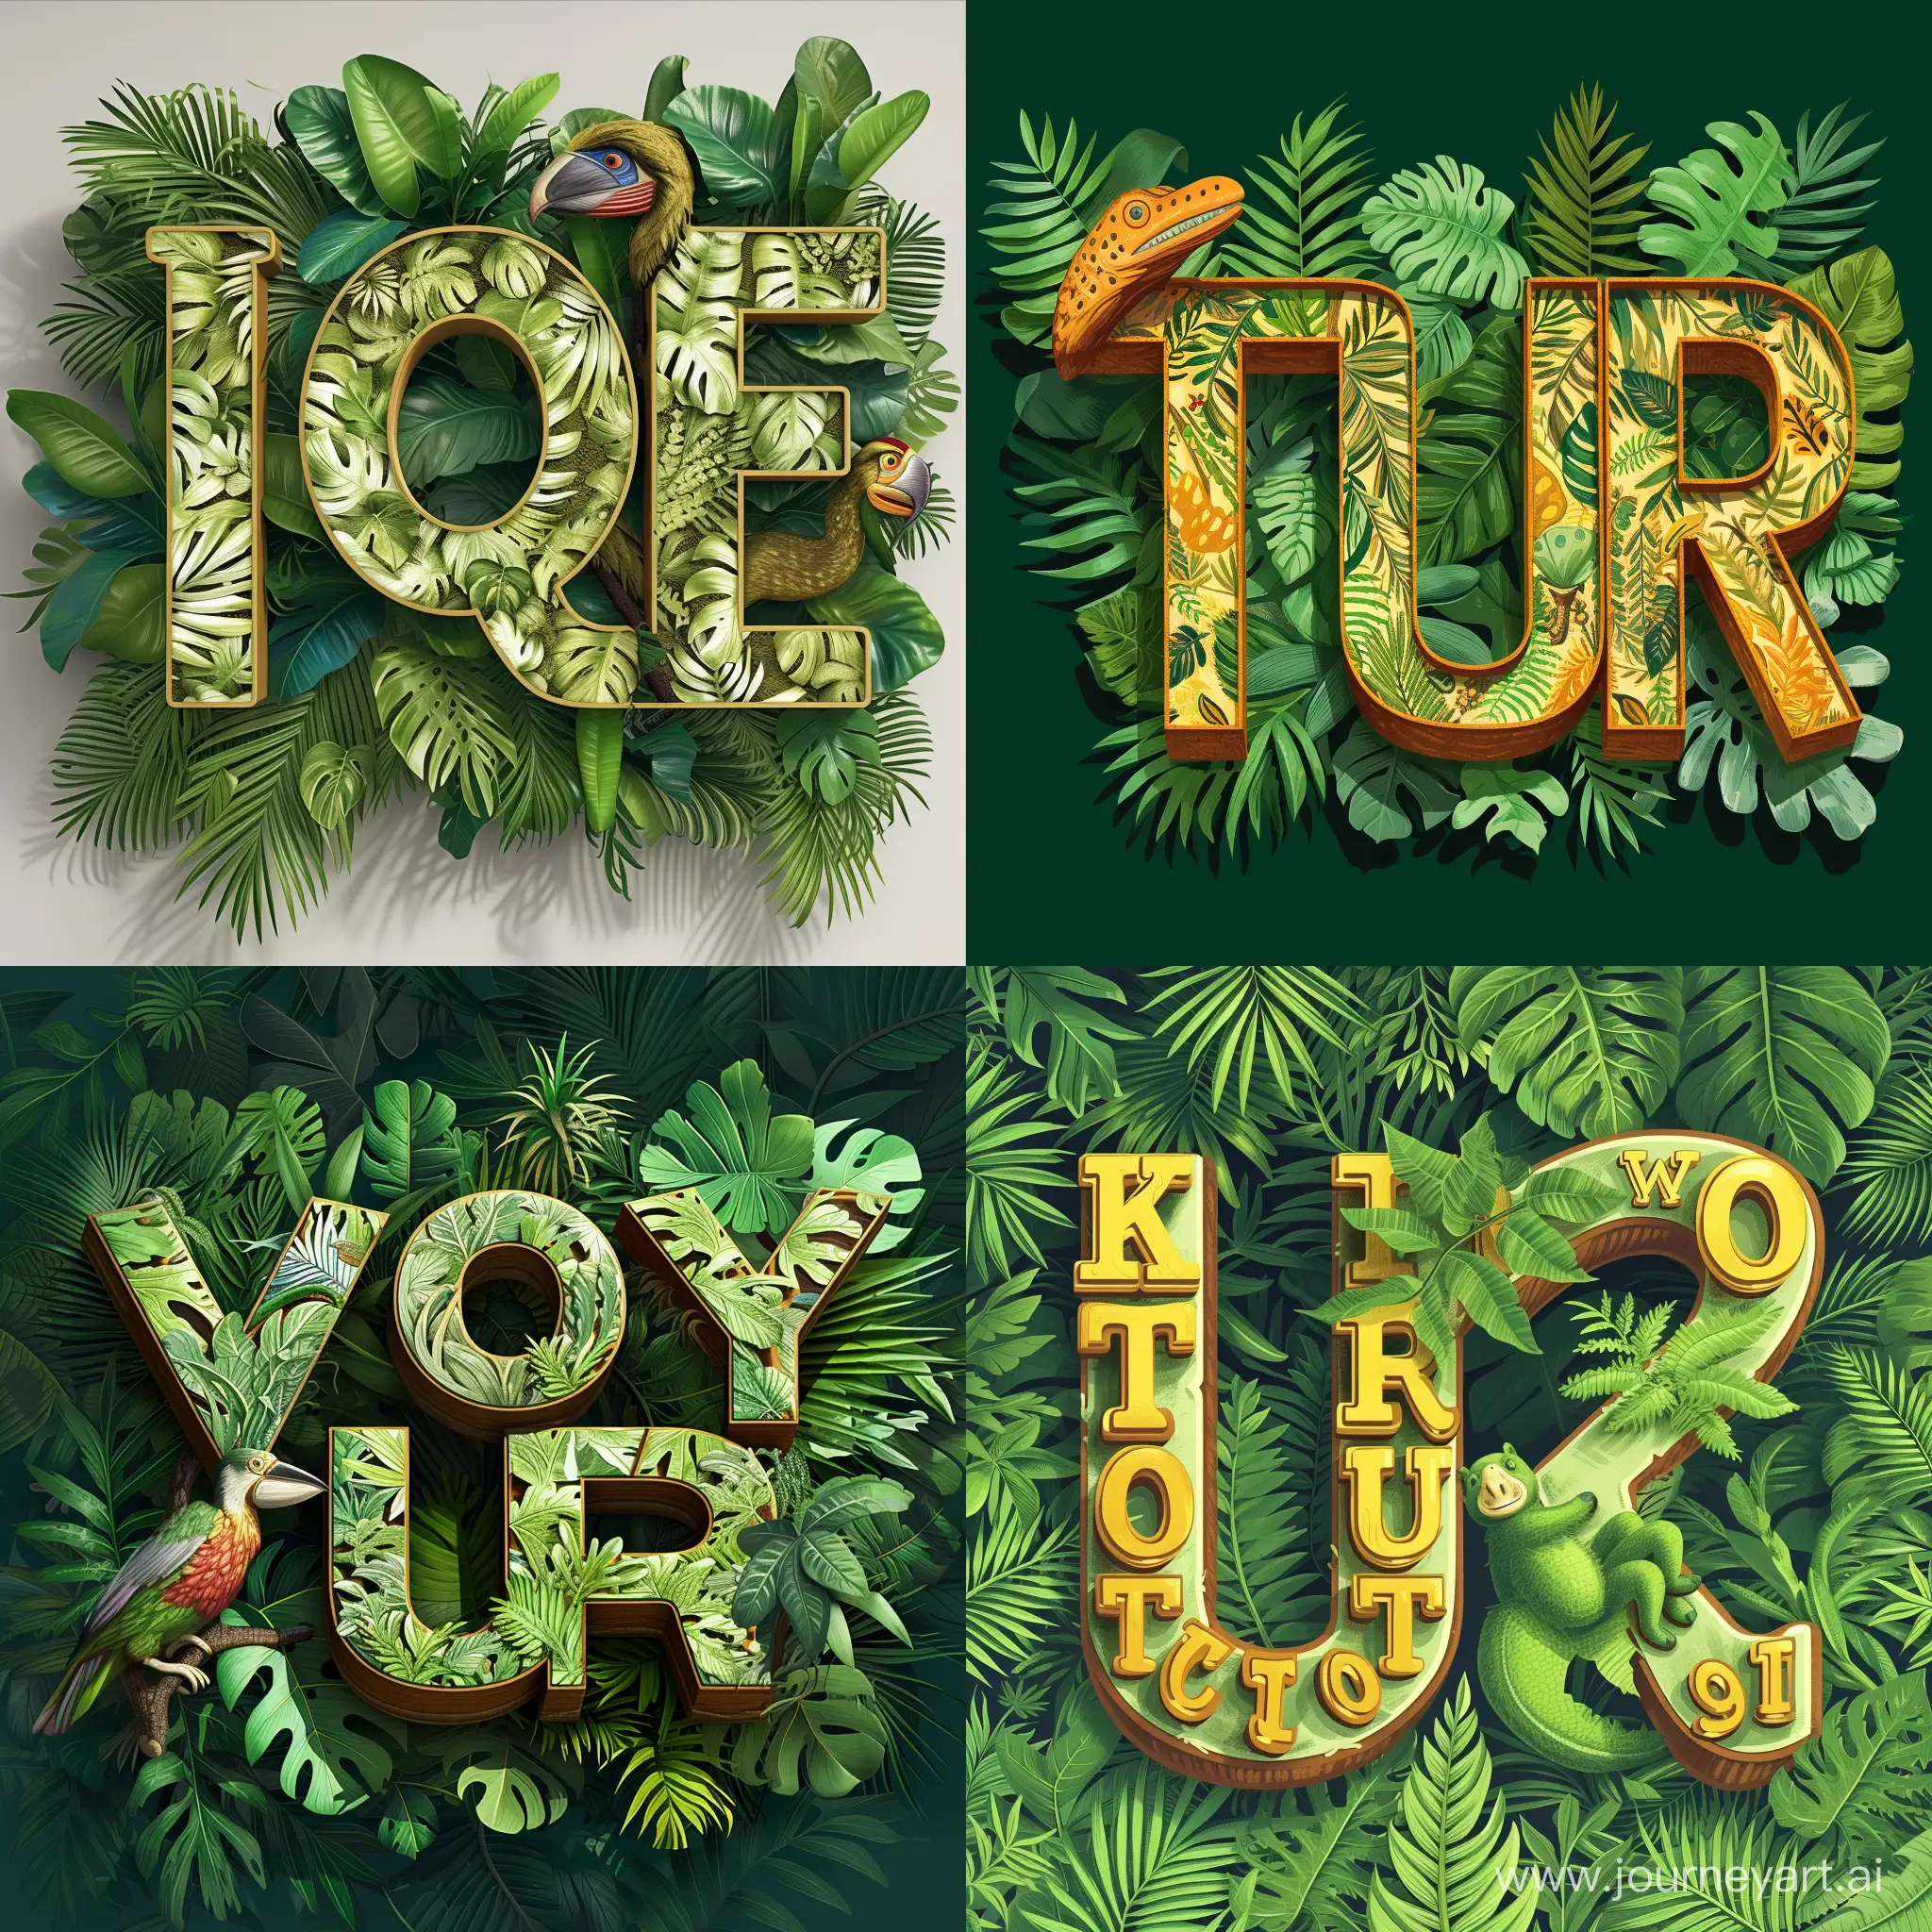 Big letters in jungle letters text "круто" 